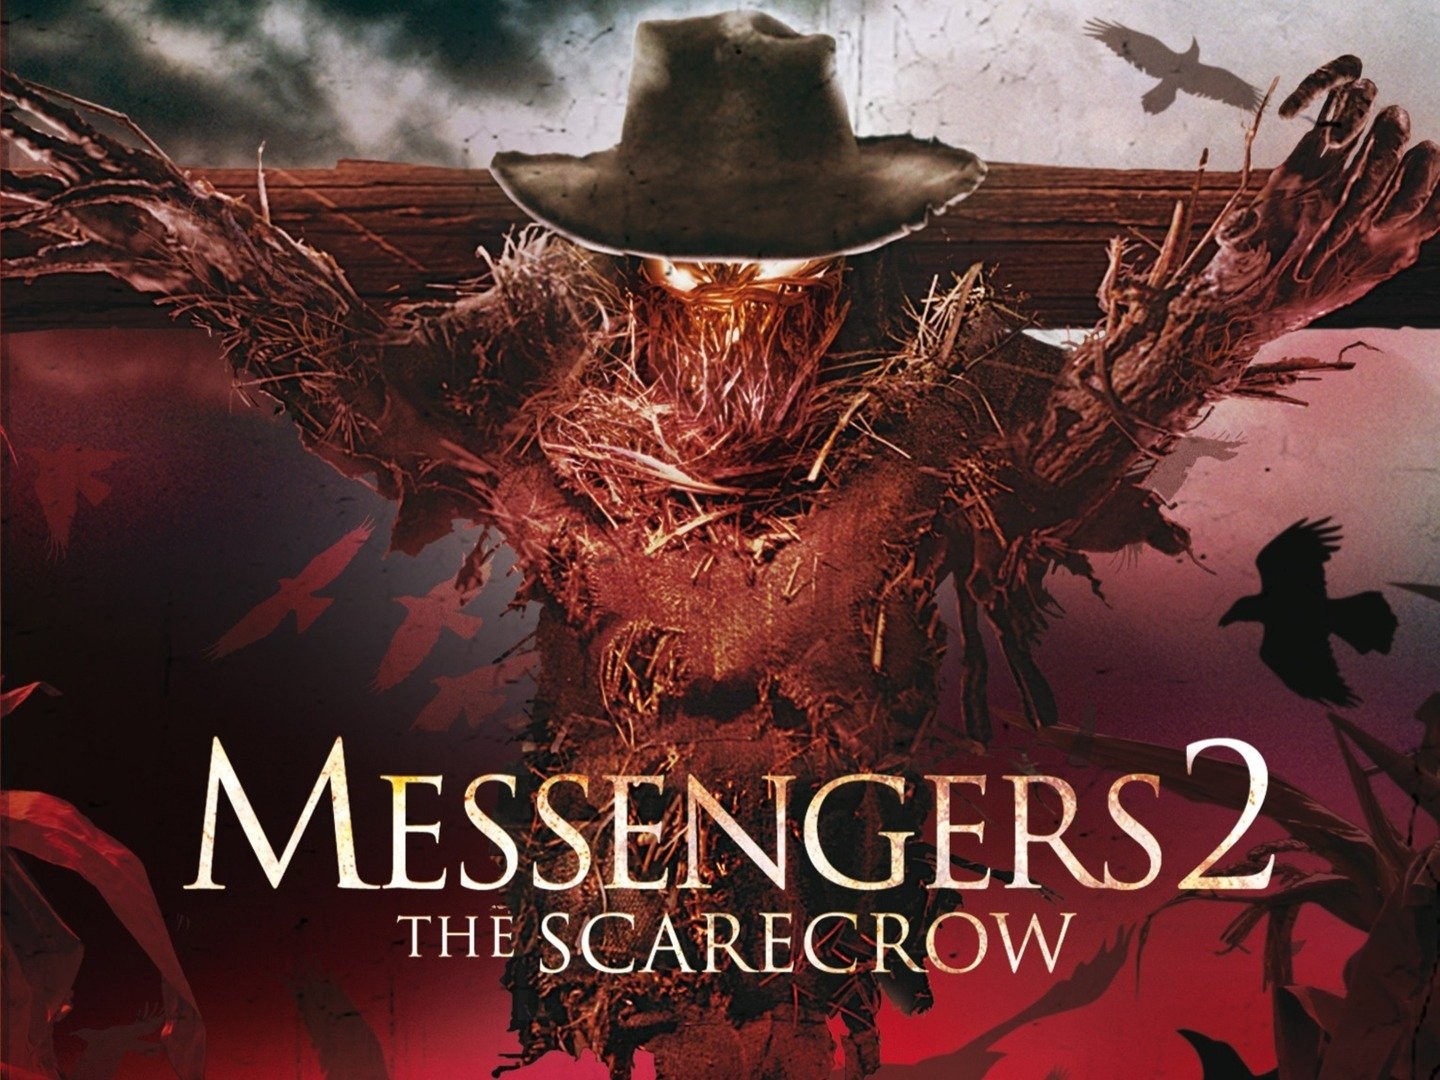 Messengers 2 the scarecrow trailer